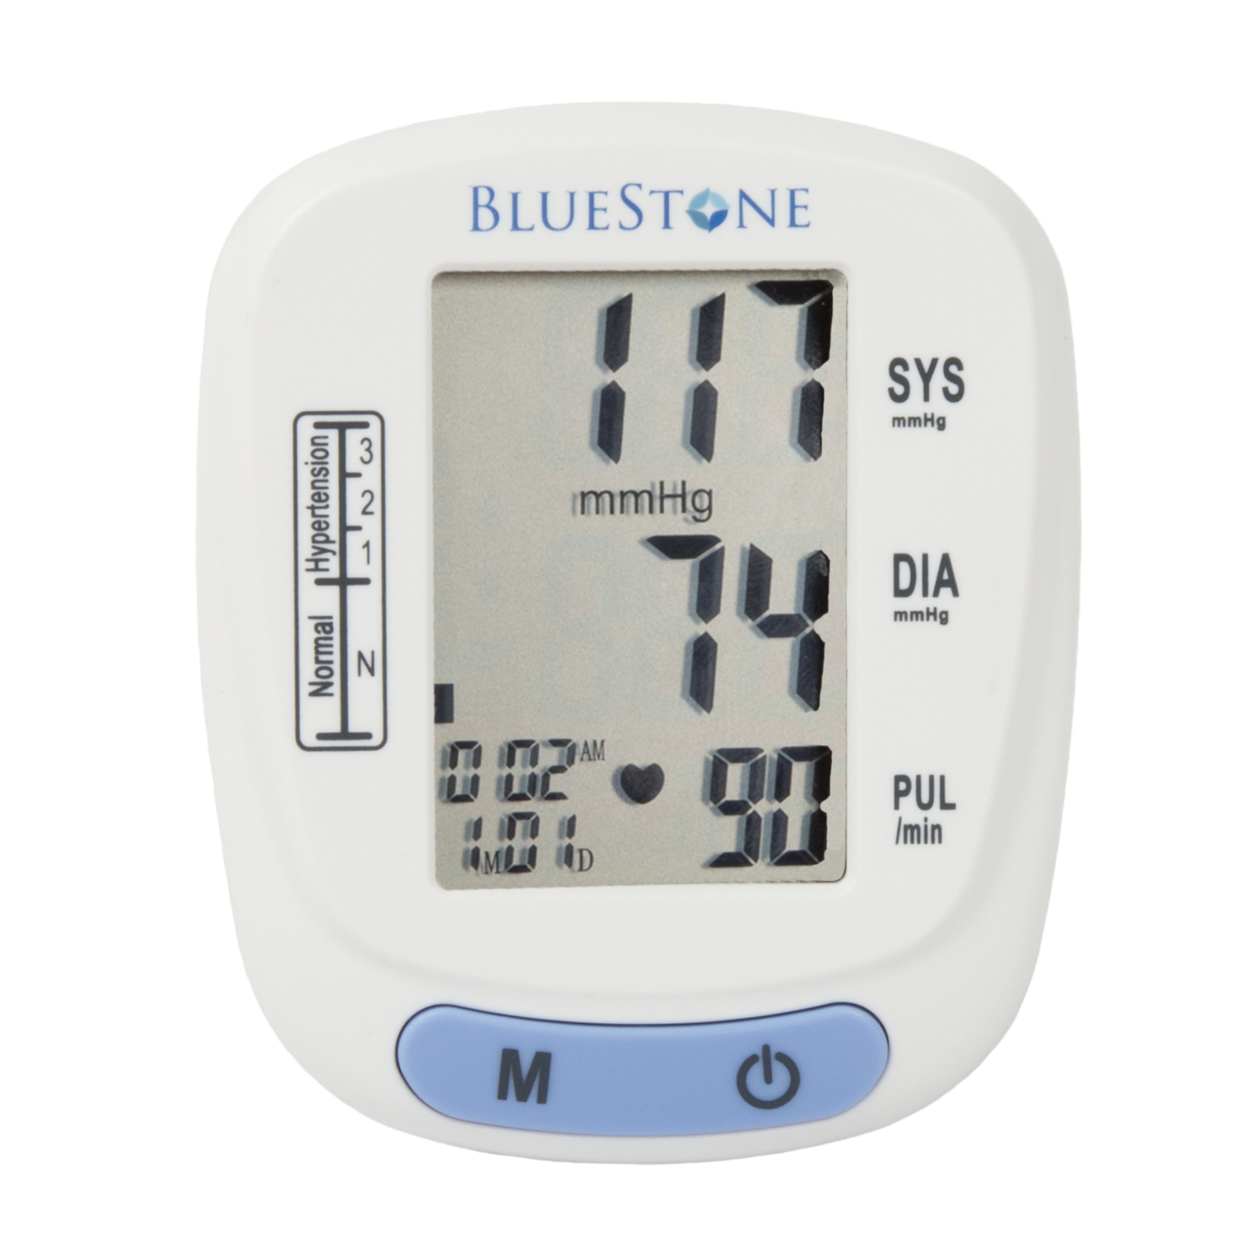 Automatic Wrist Blood Pressure Monitor With Digital LCD Display Screen- BP And Pulse Monitoring With Adjustable Cuff And Storage Case